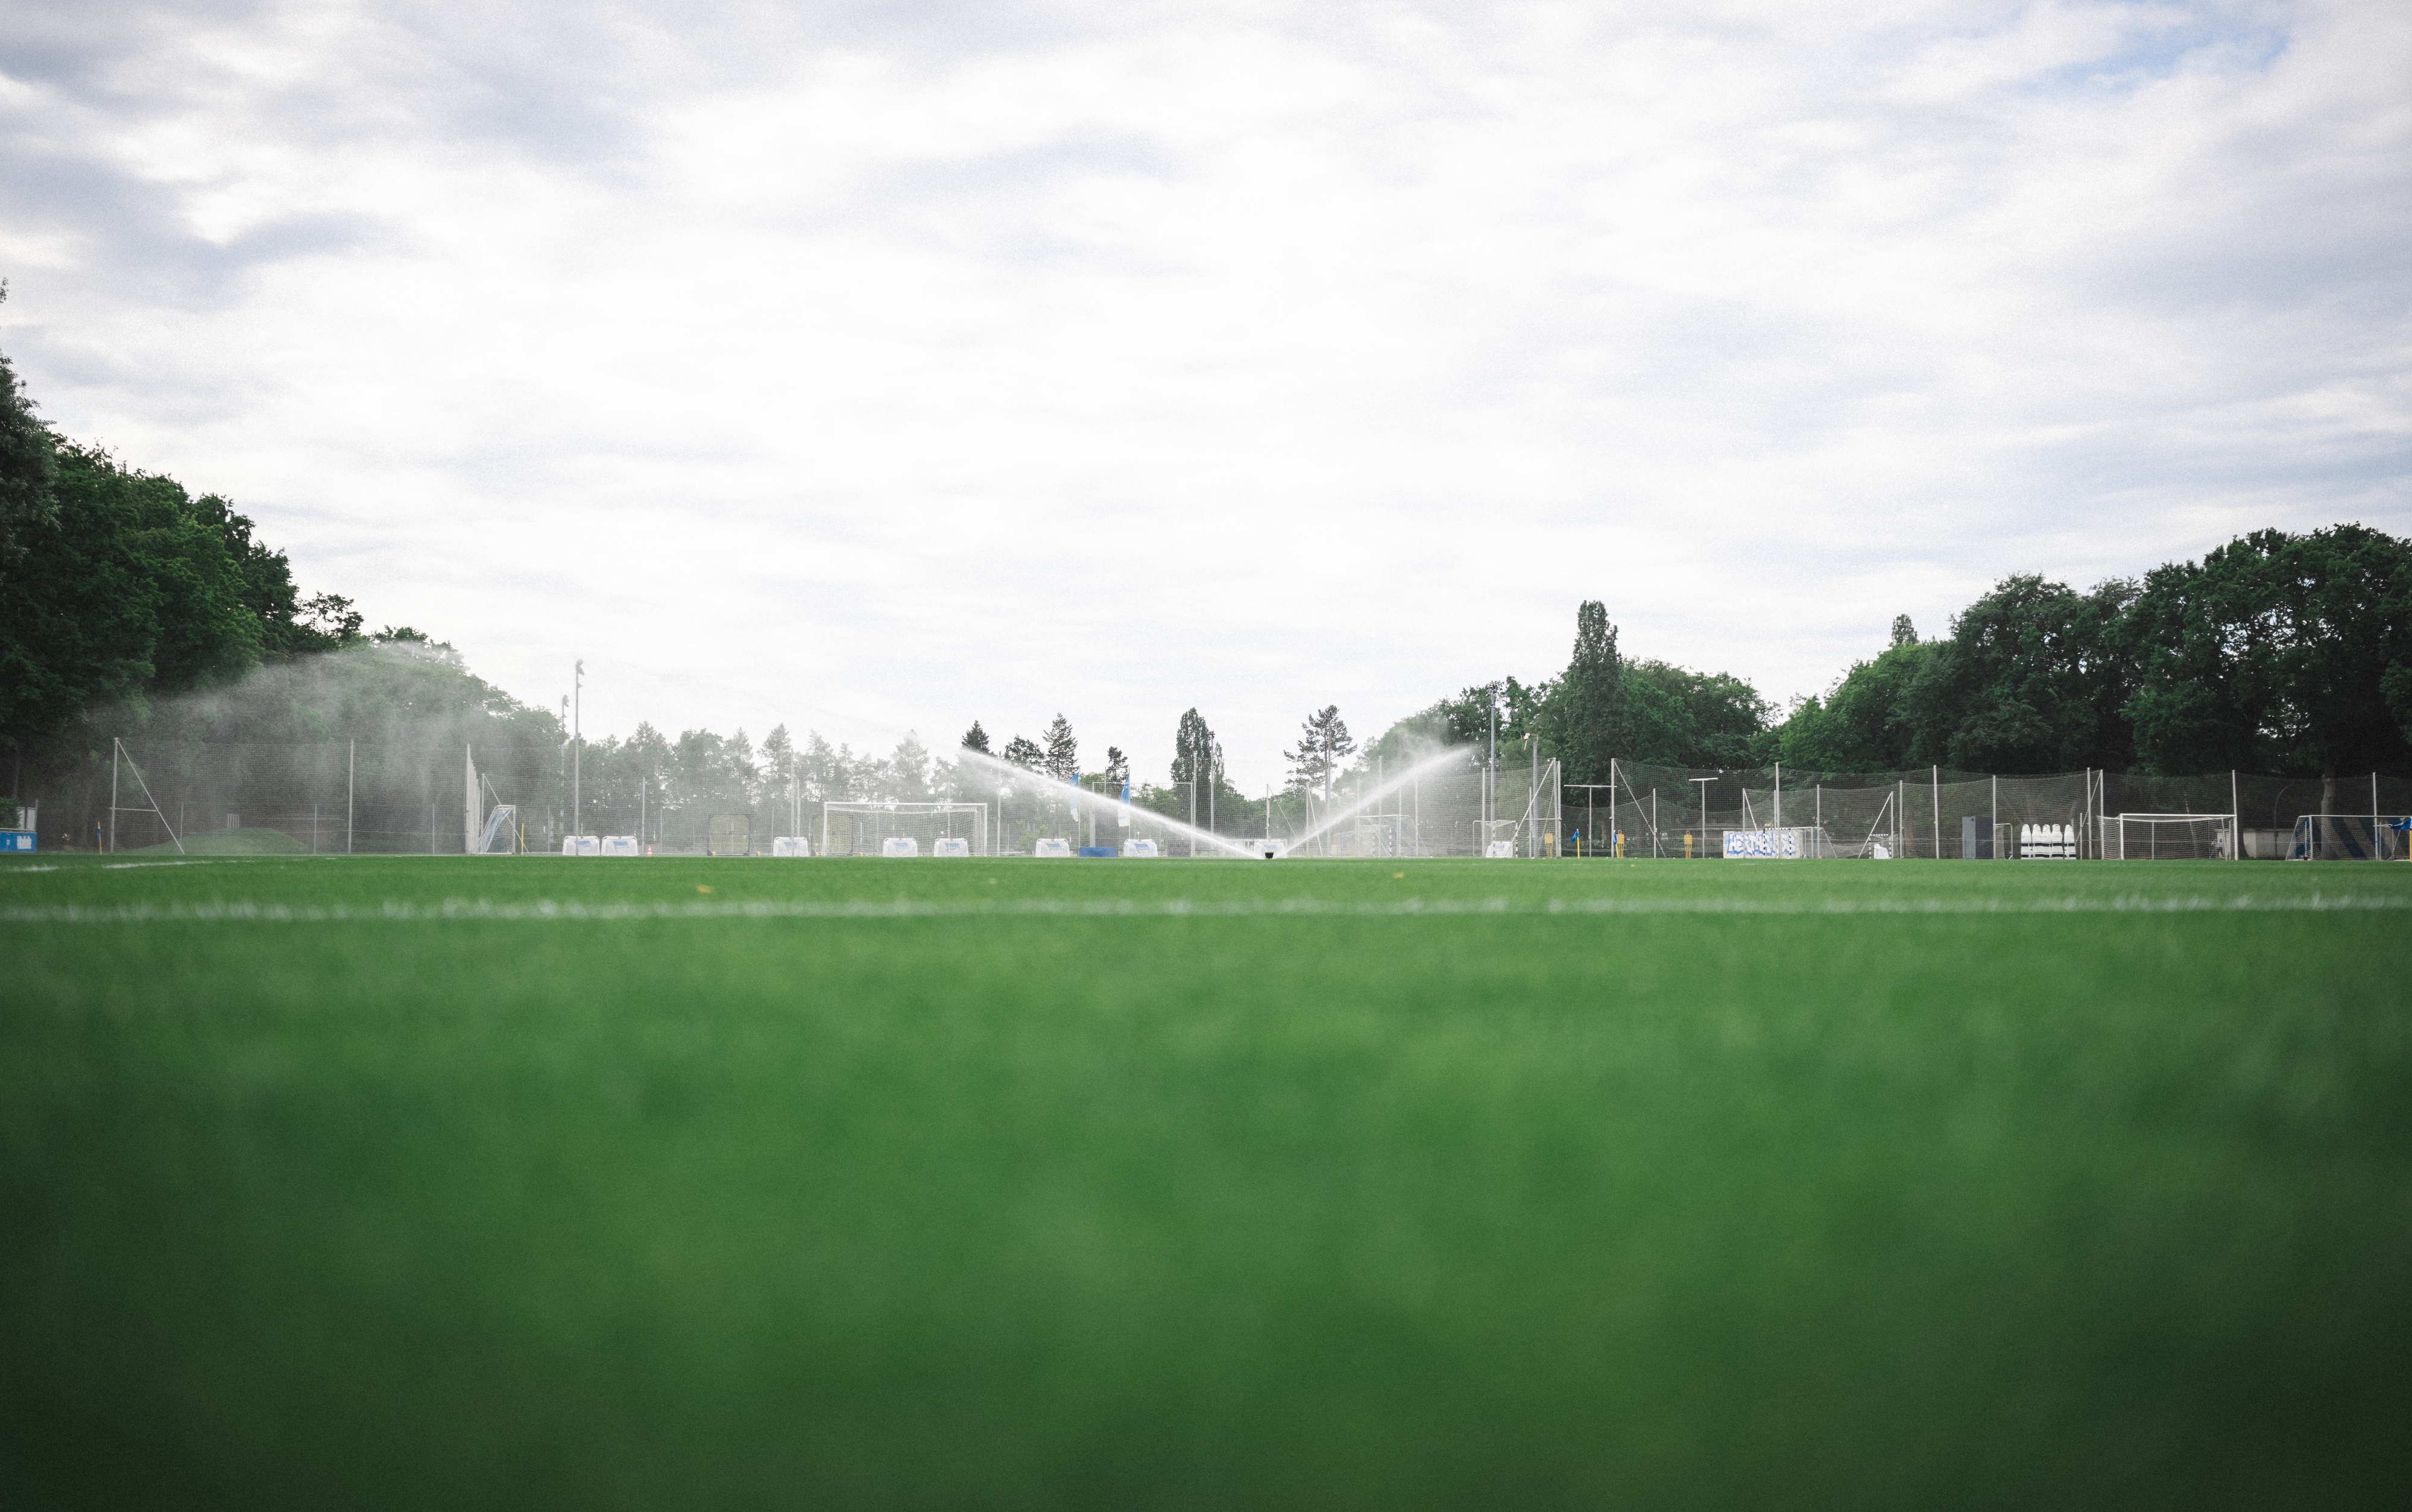 Sprinklers in action on the training ground.